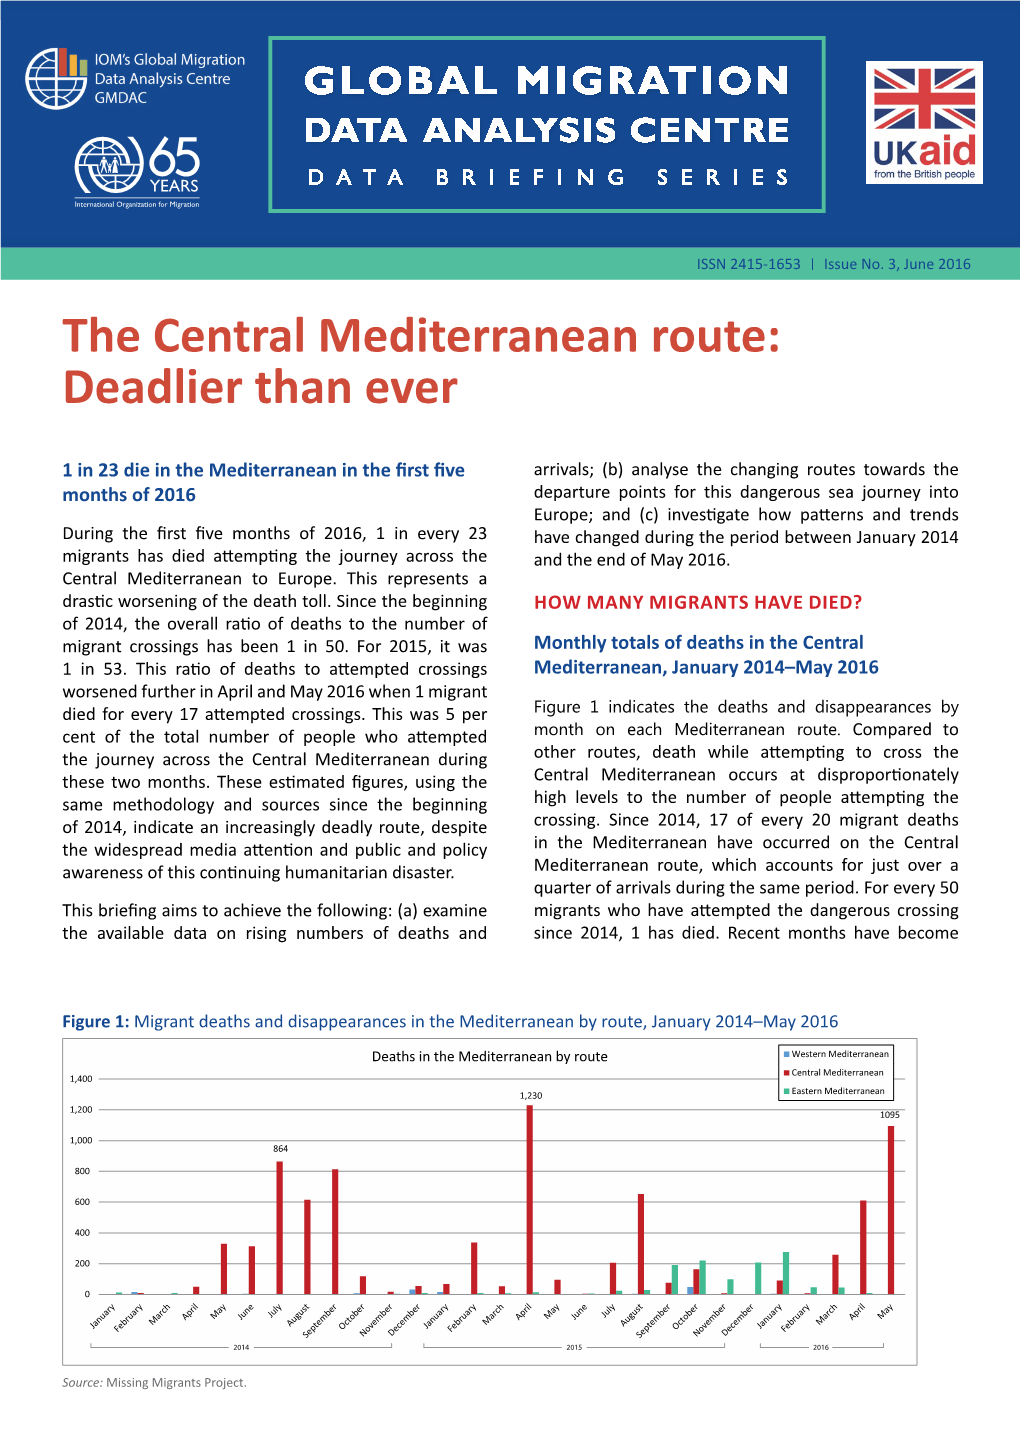 The Central Mediterranean Route: Deadlier Than Ever